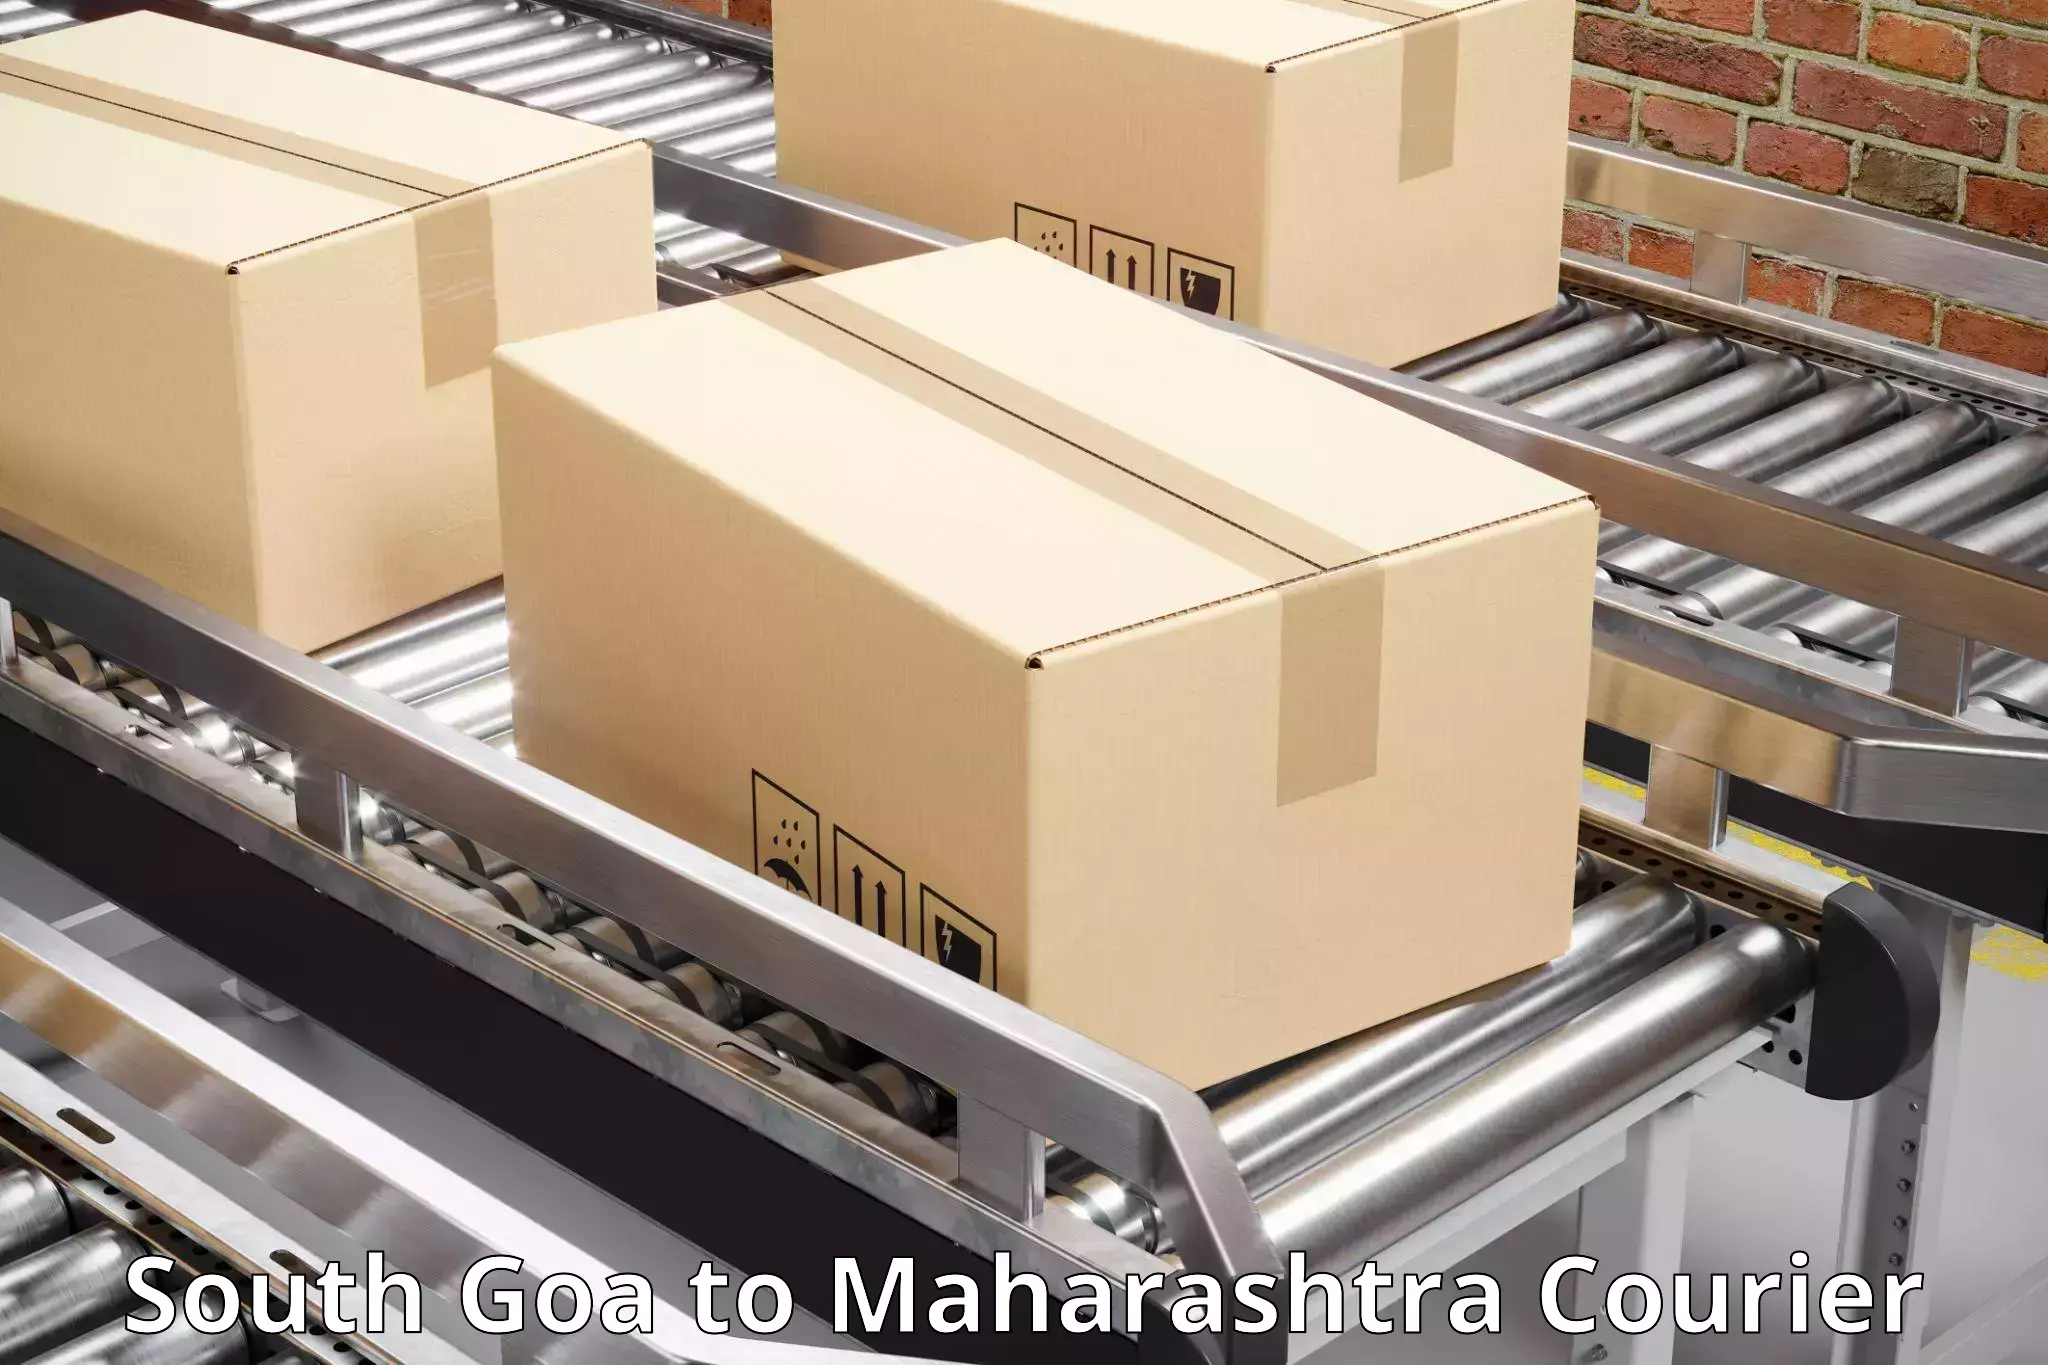 Delivery service partnership South Goa to Tuljapur